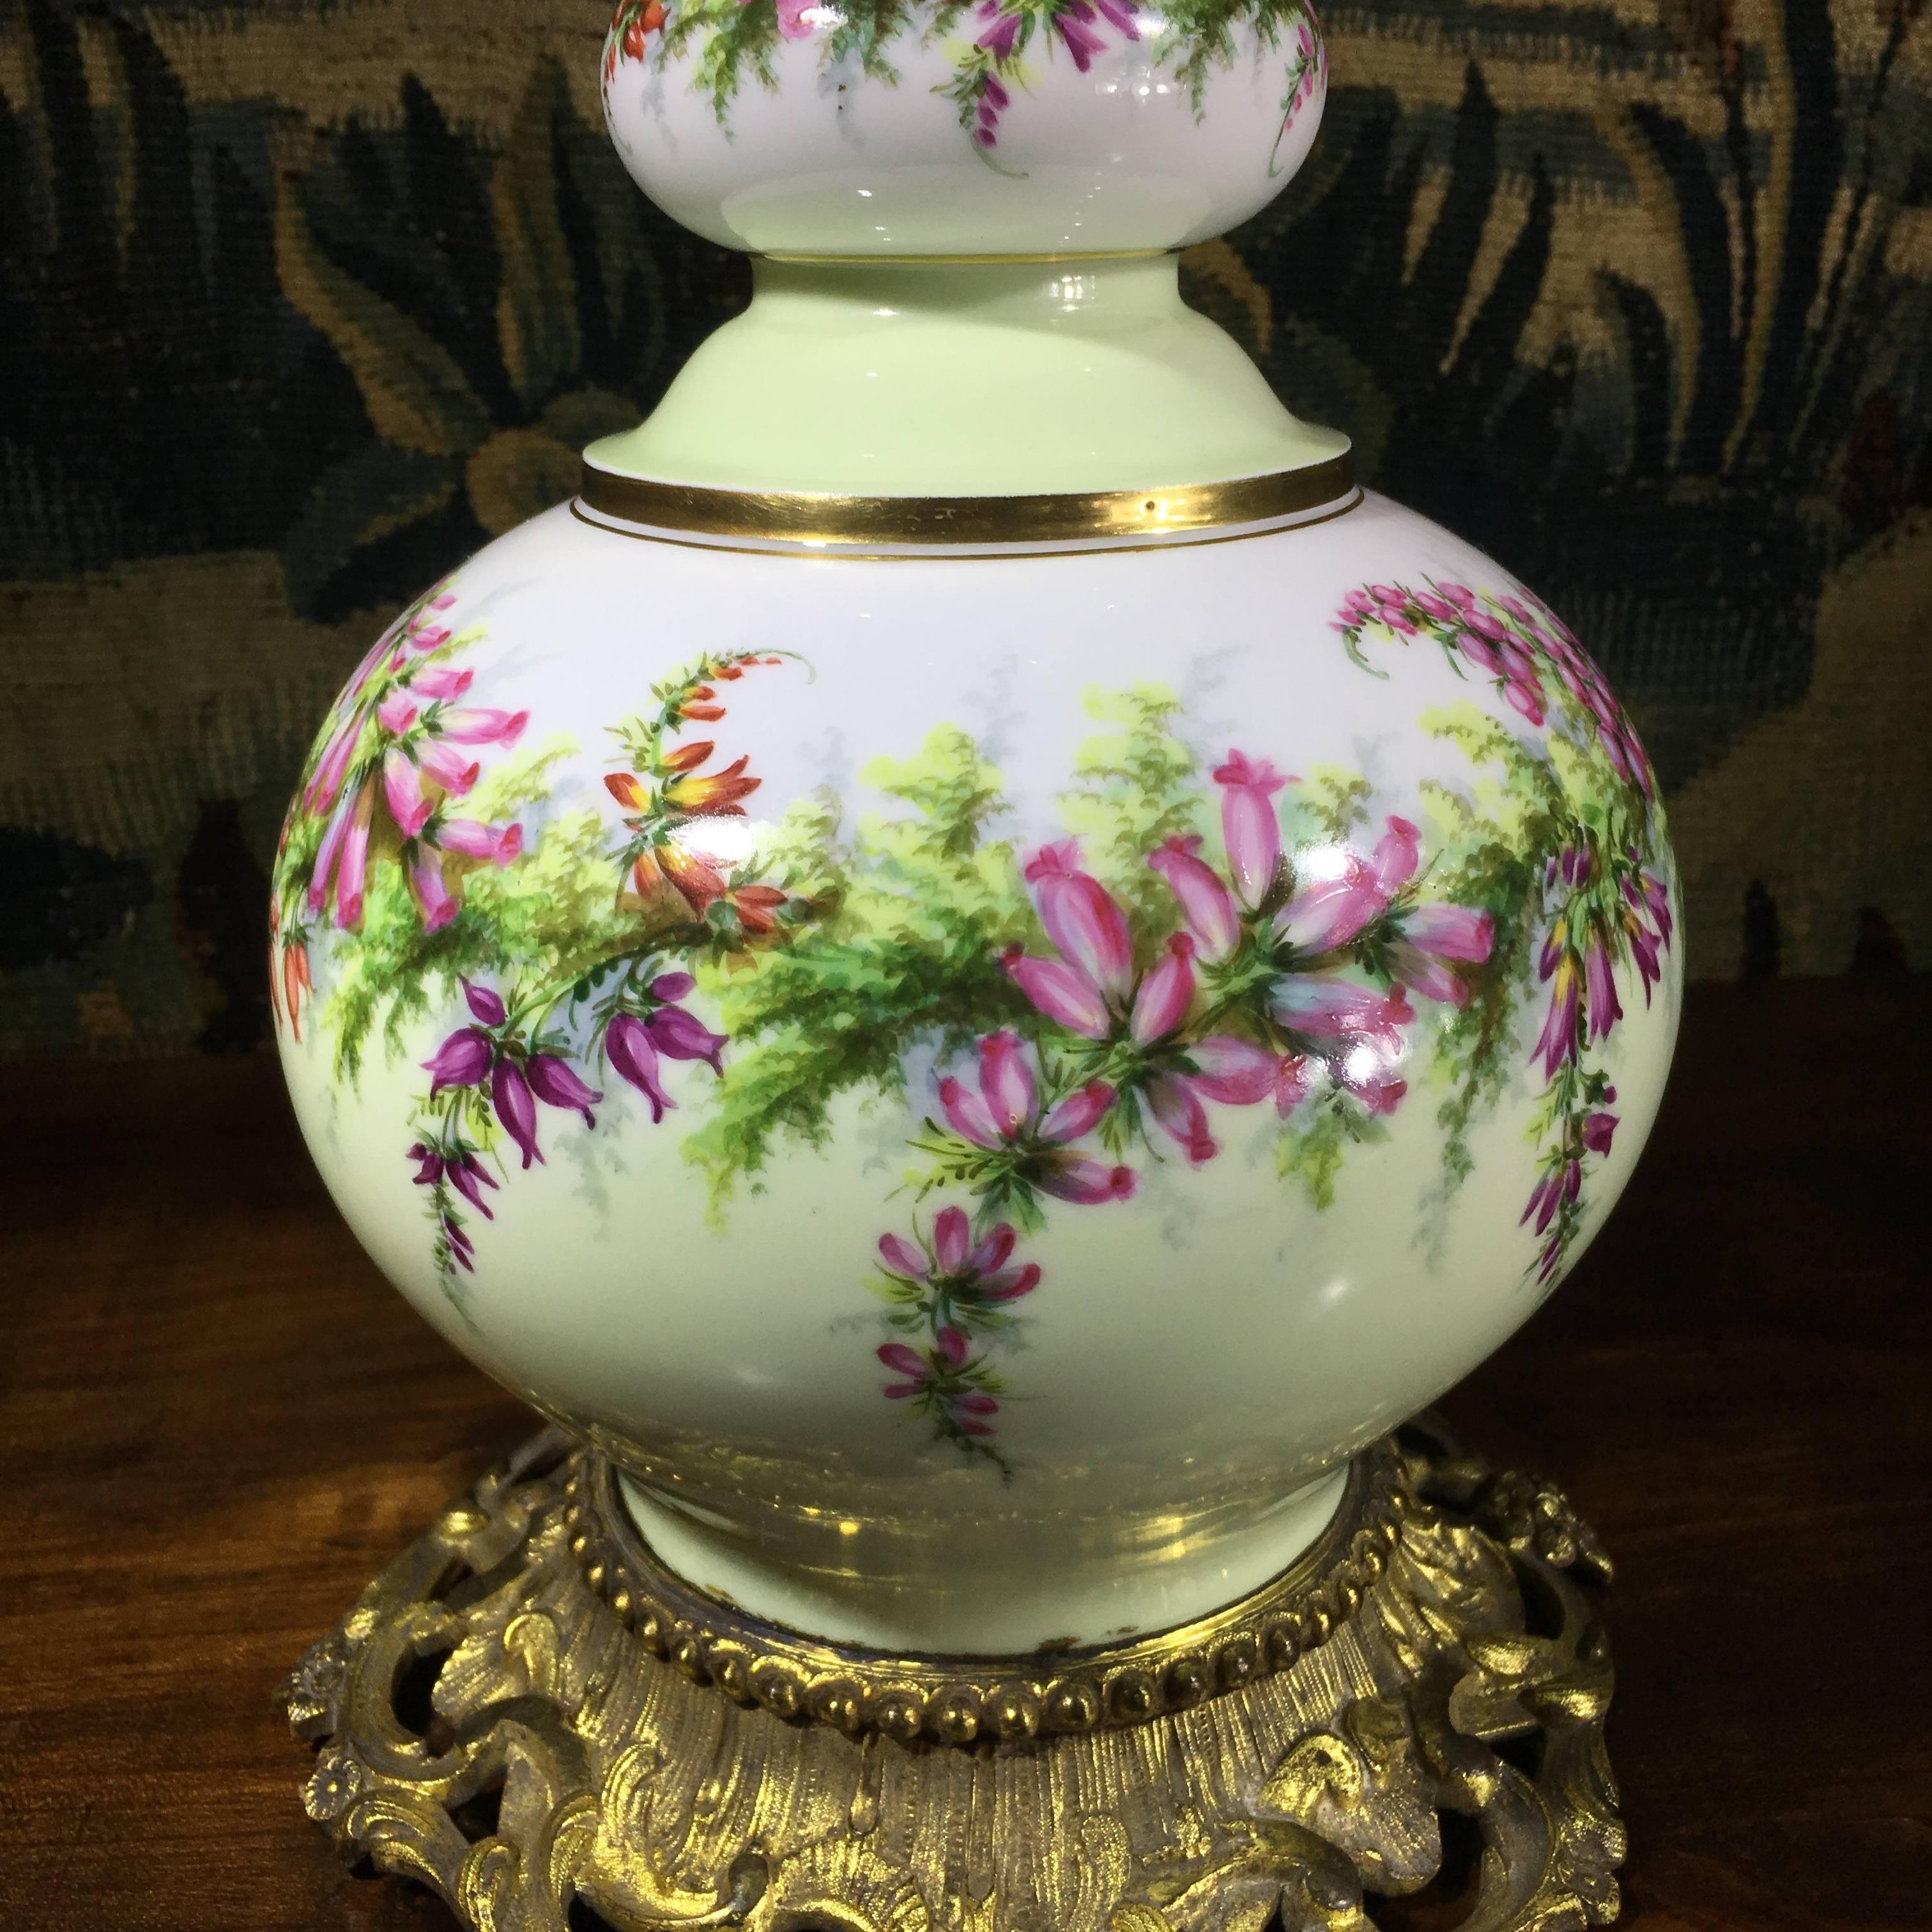 Handsome large Victorian porcelain vase, superbly painted with wreaths of flowers including heather, with early electric light conversion, possibly from an oil burner. 
circa 1885.